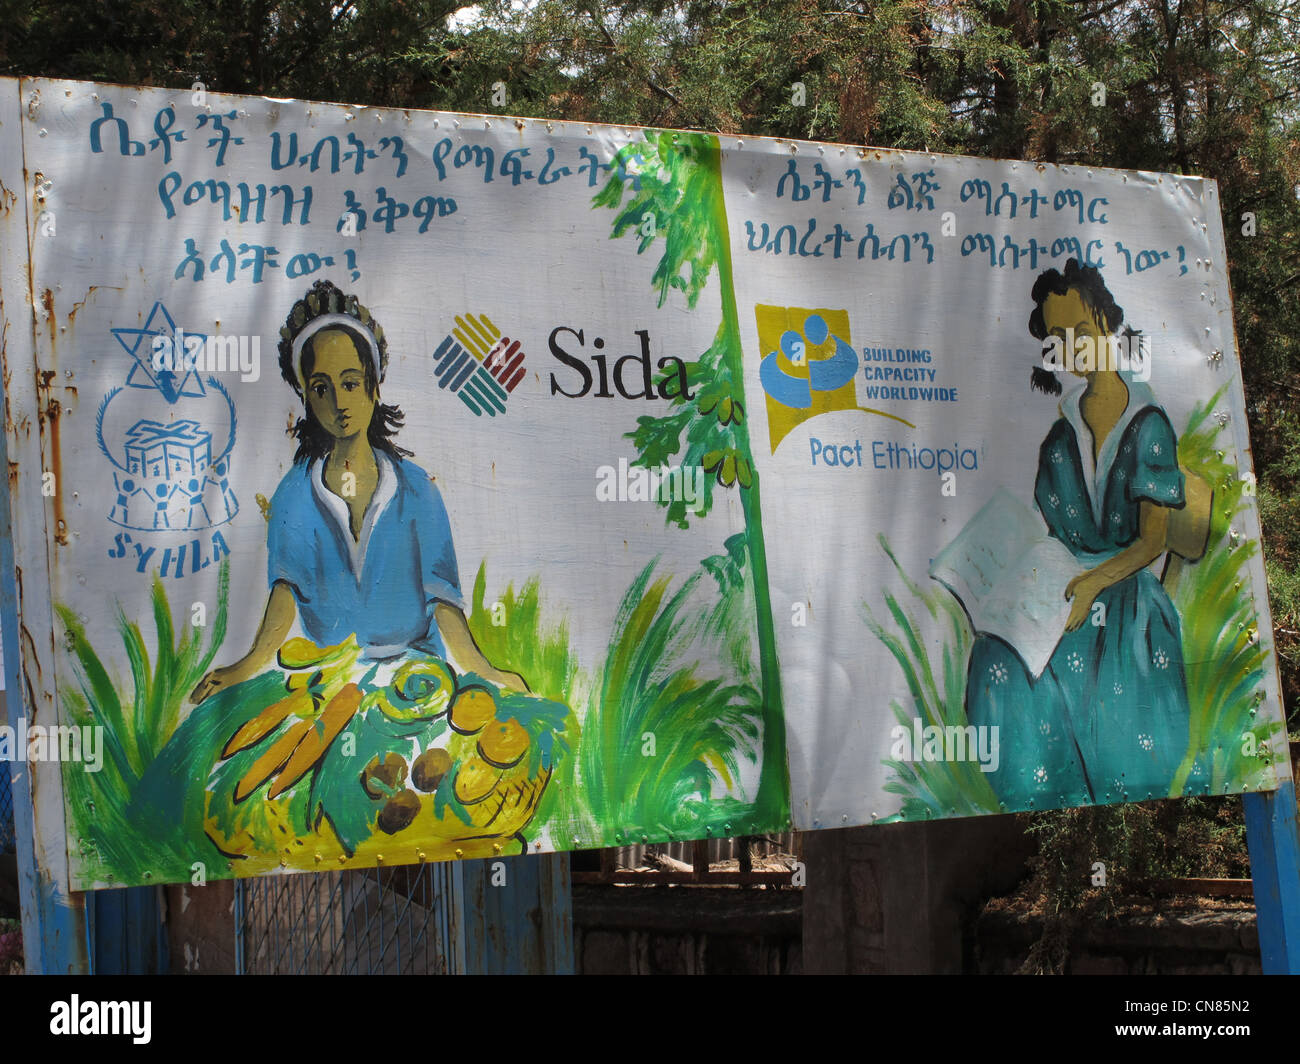 Billboards advertising the work of NGO Non Governmental Organizations and charities in Ethiopia Stock Photo